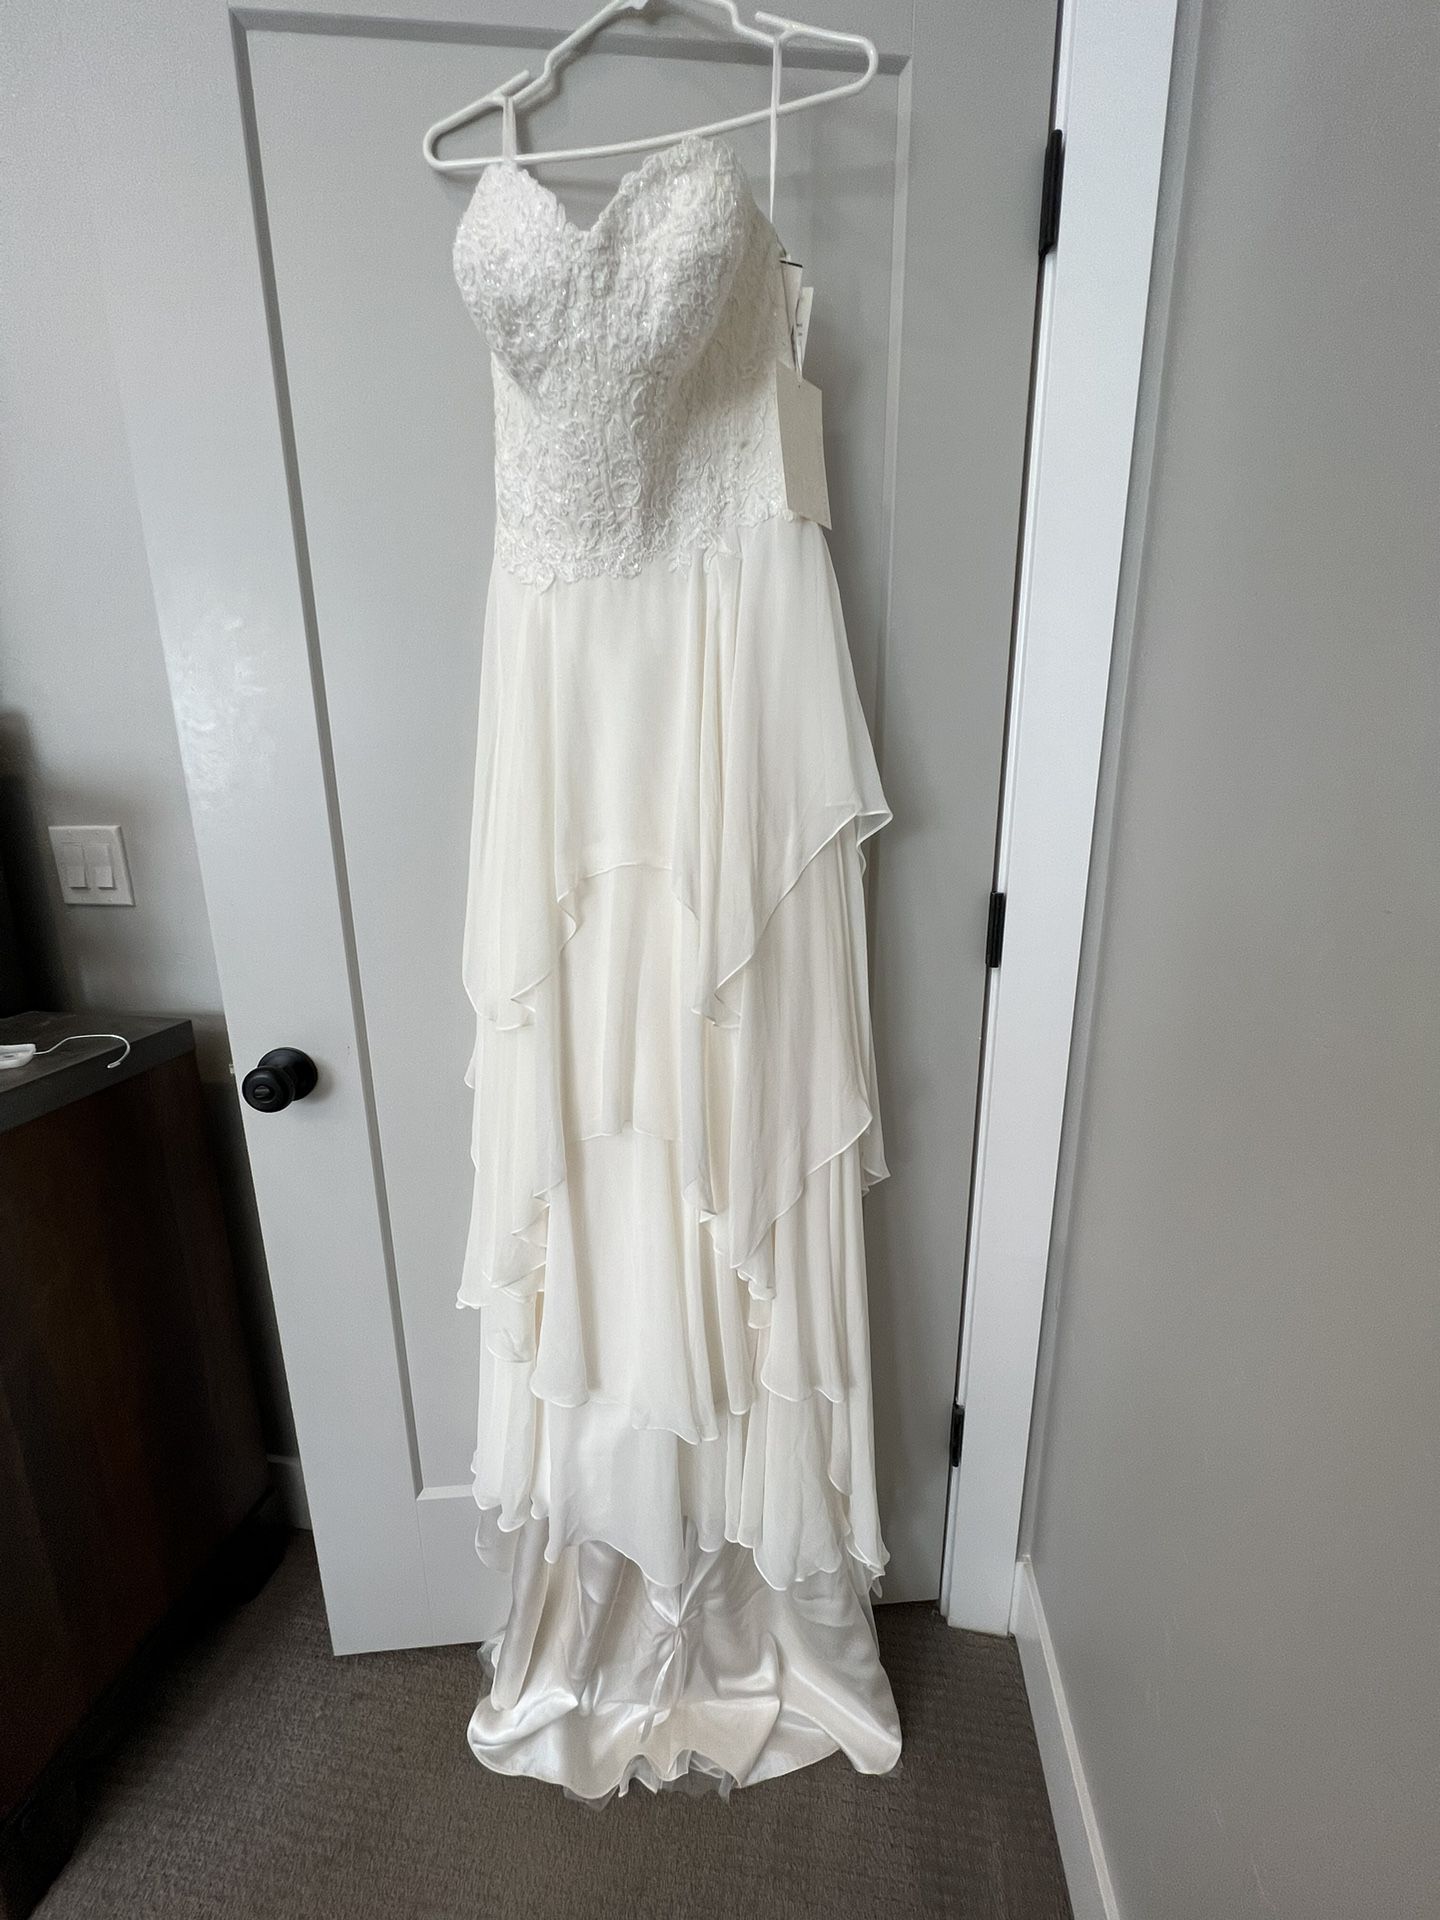 Wedding Dress And Accessories, New